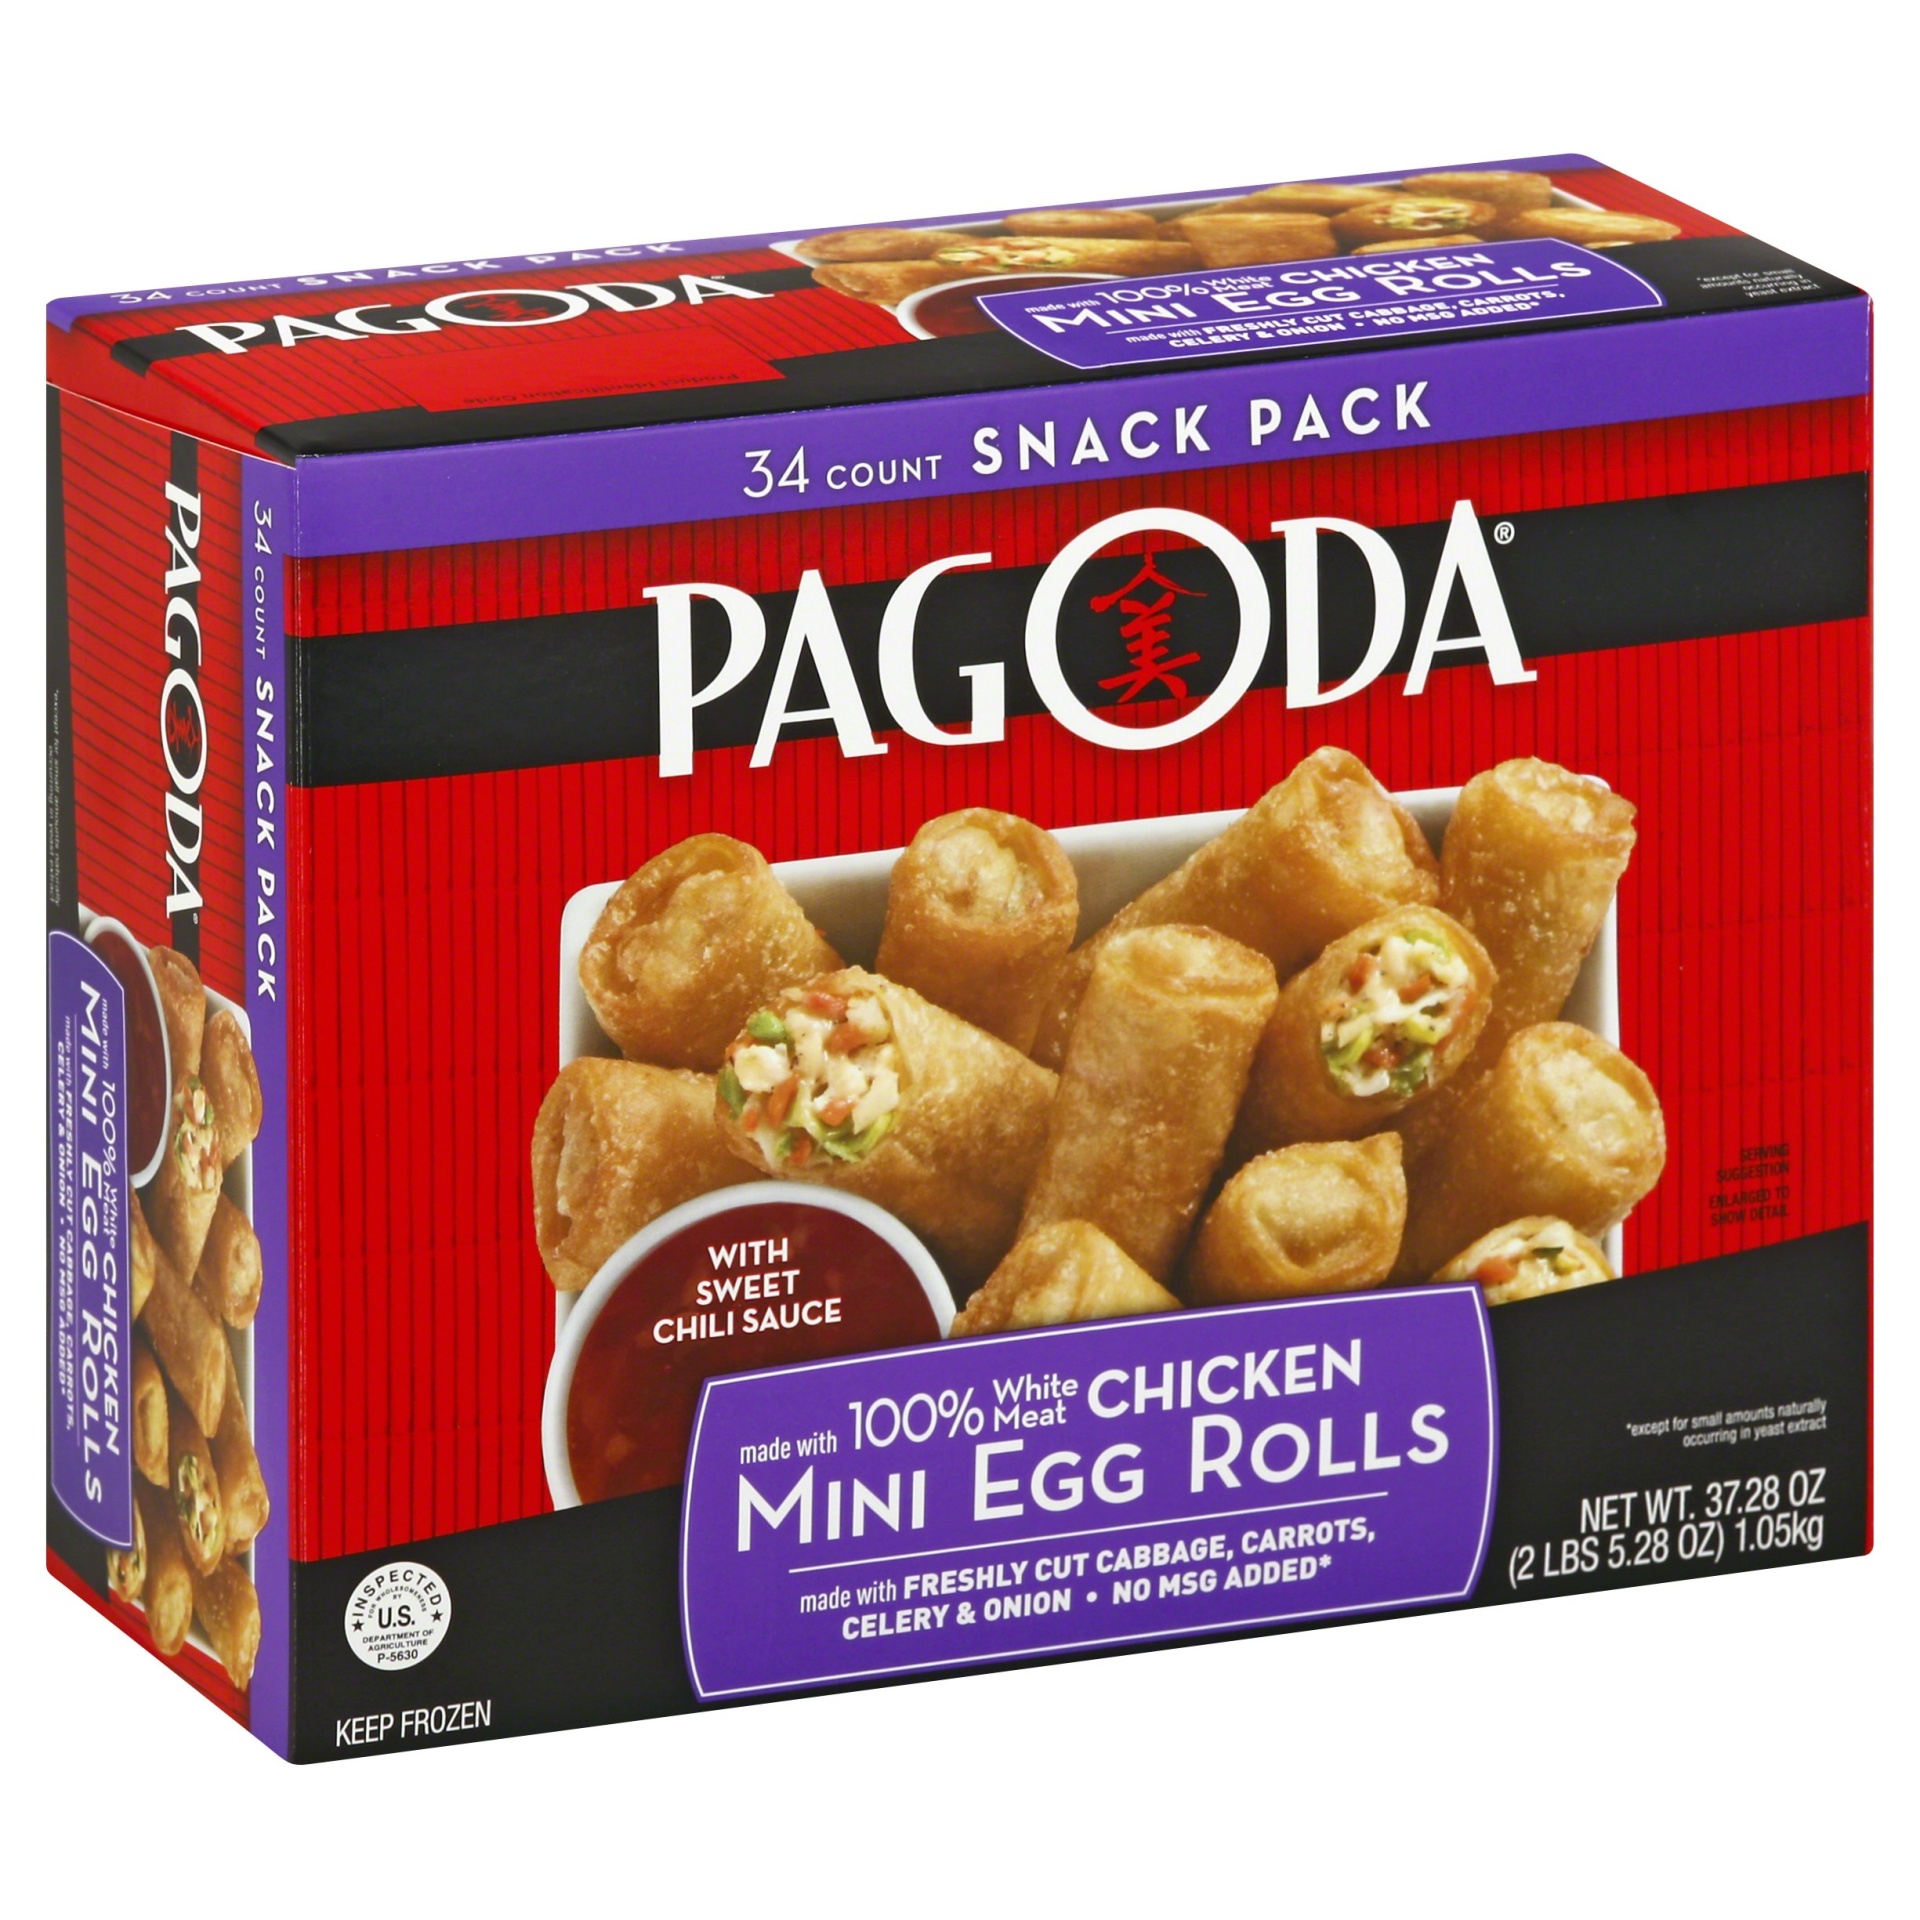 slide 1 of 8, Pagoda Express White Meat Chicken Mini Egg Rolls With Sweet Chili Sauce, 37.28 oz